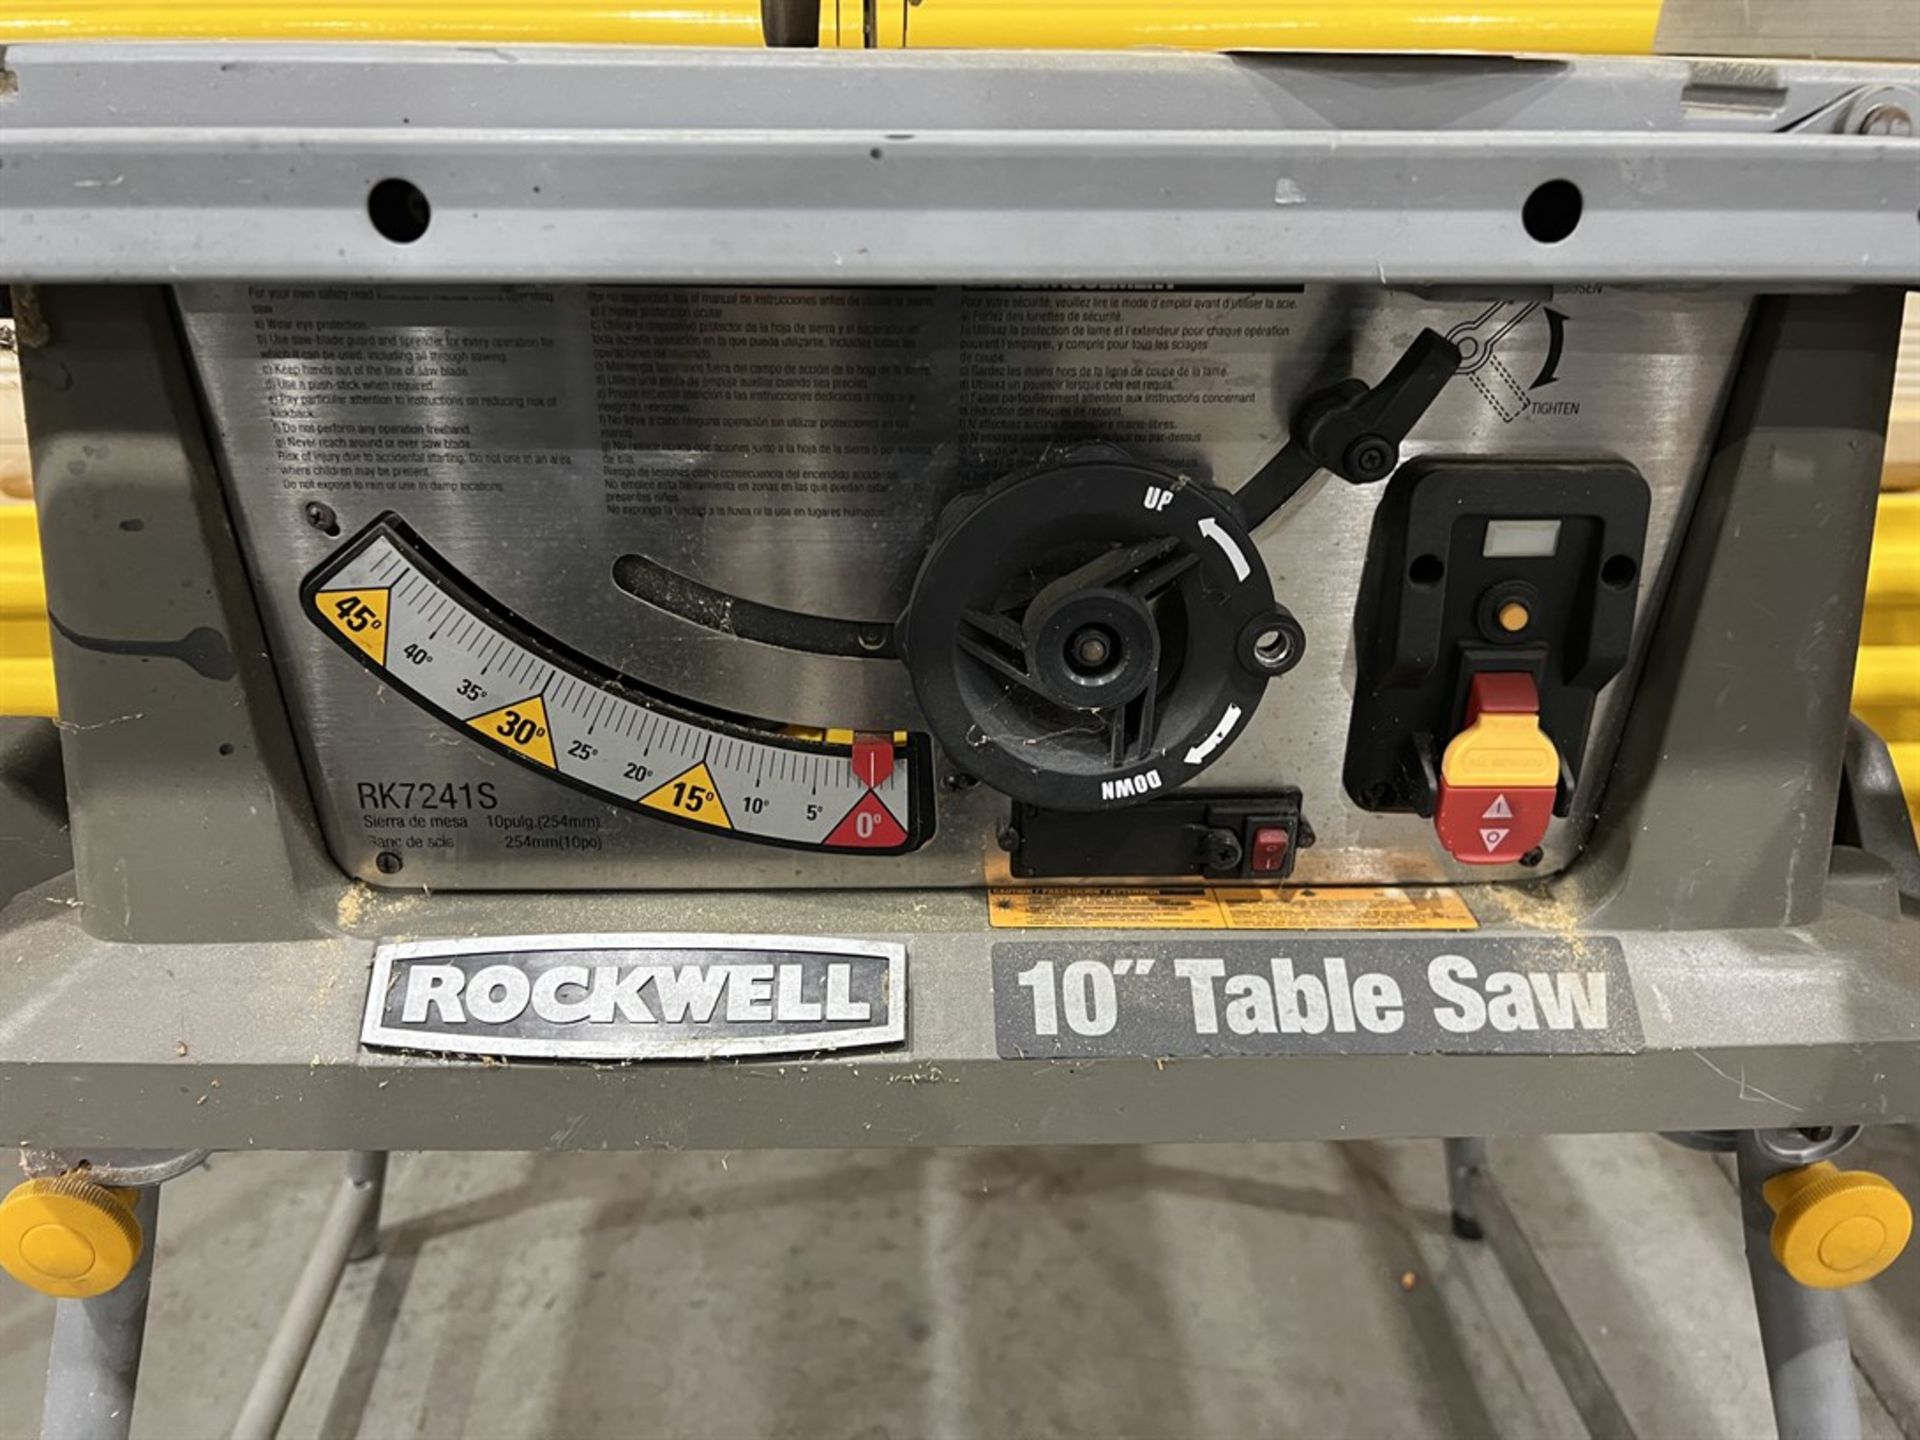 ROCKWELL RK7241S 10" Table Saw - Image 4 of 4